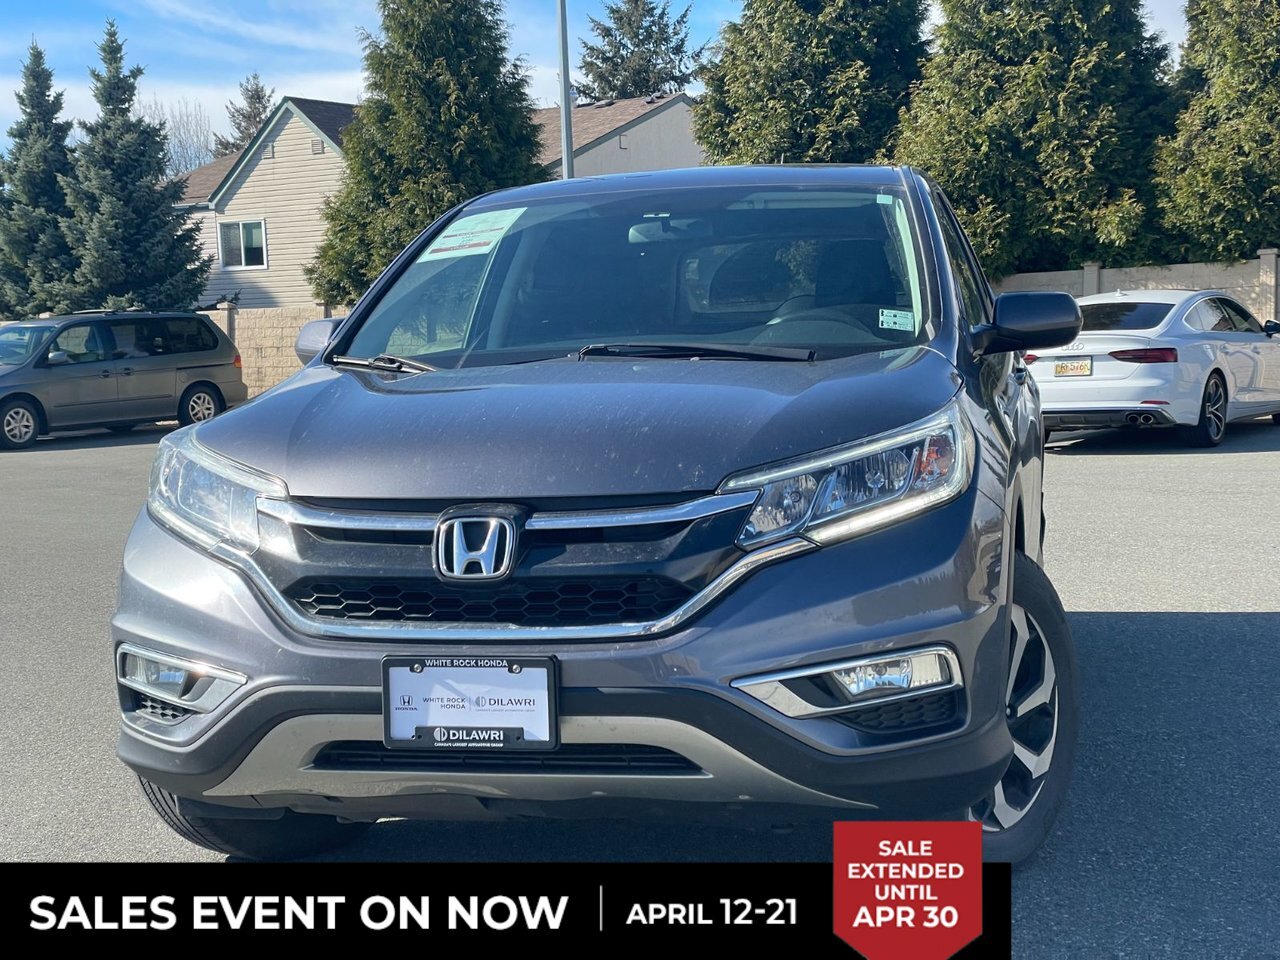 2016 Honda CR-V SE AWD | Local Trade | One Owner | No Accidents | 